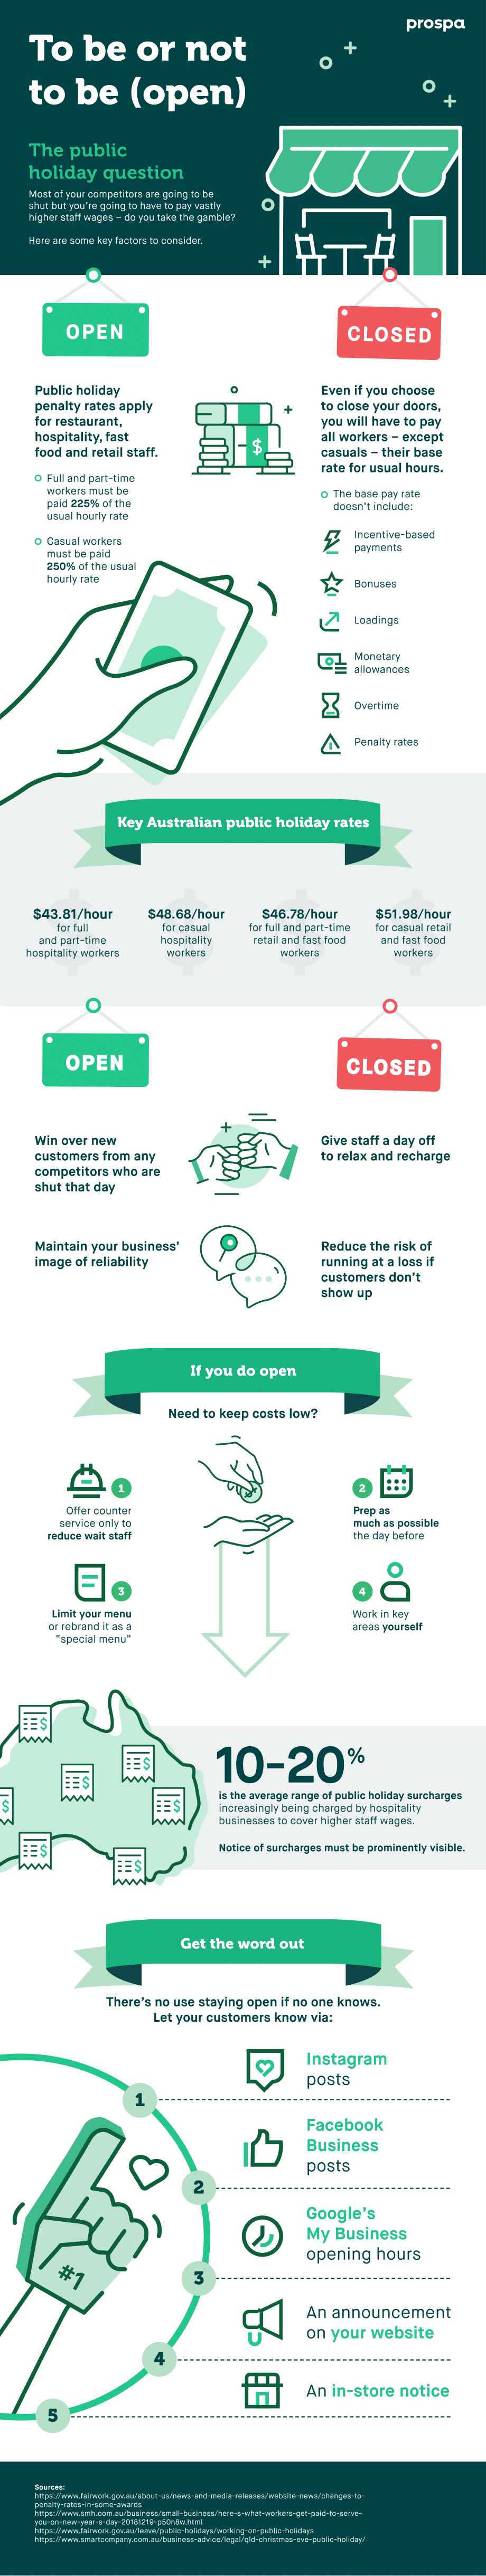 Infographic: Is it worth opening on a public holiday? | Prospa